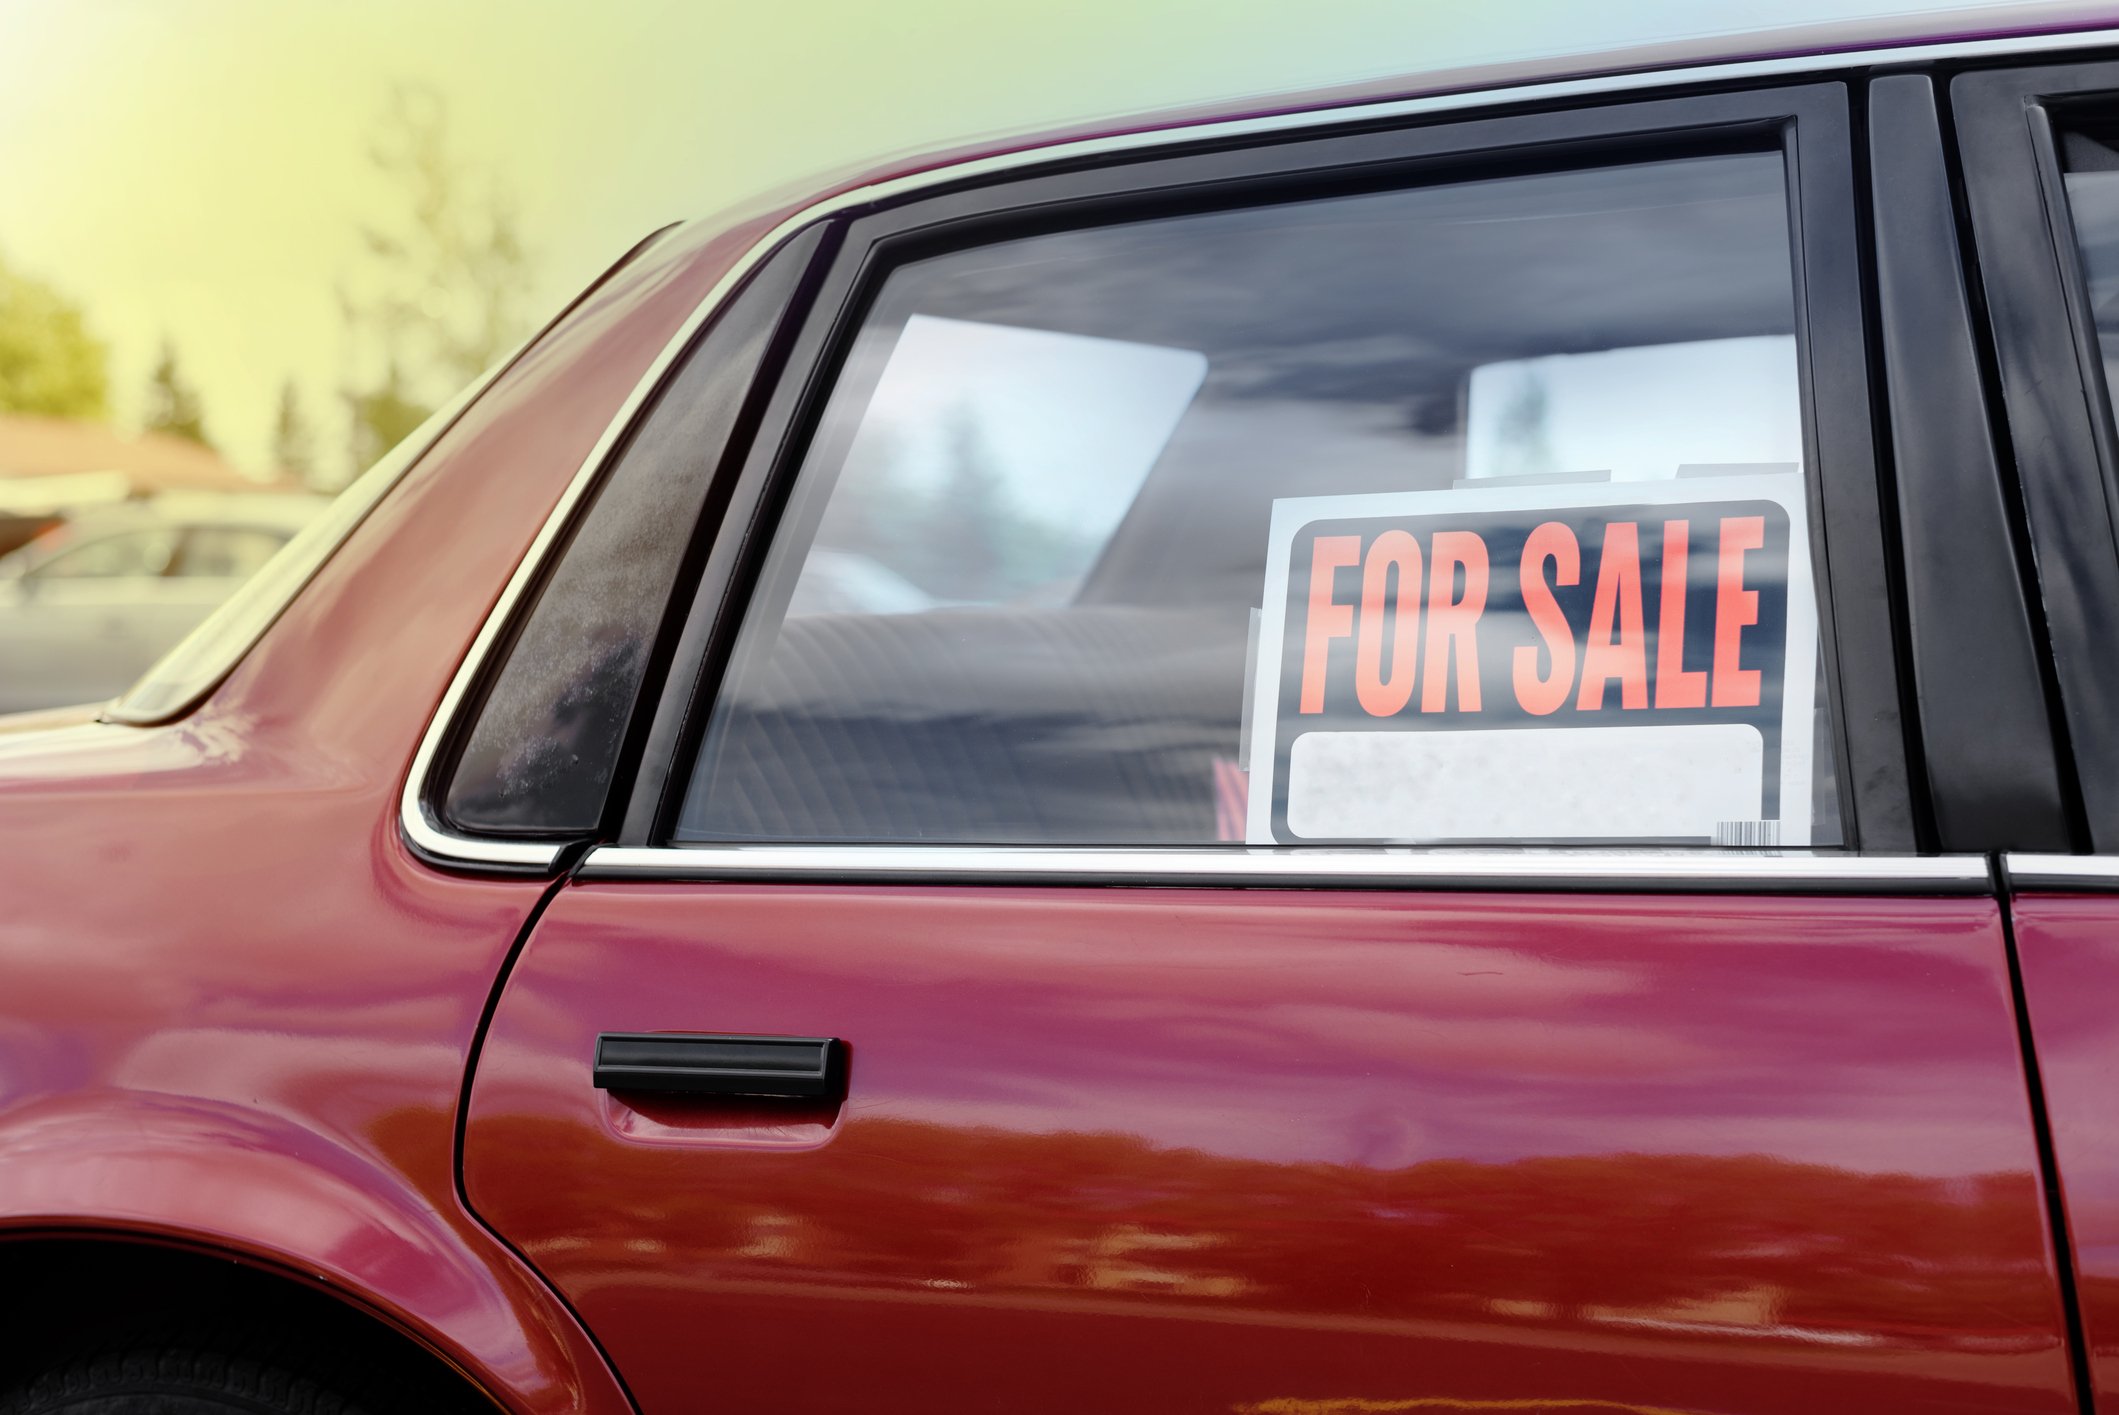 What You Need to Know Before Buying a Used Car